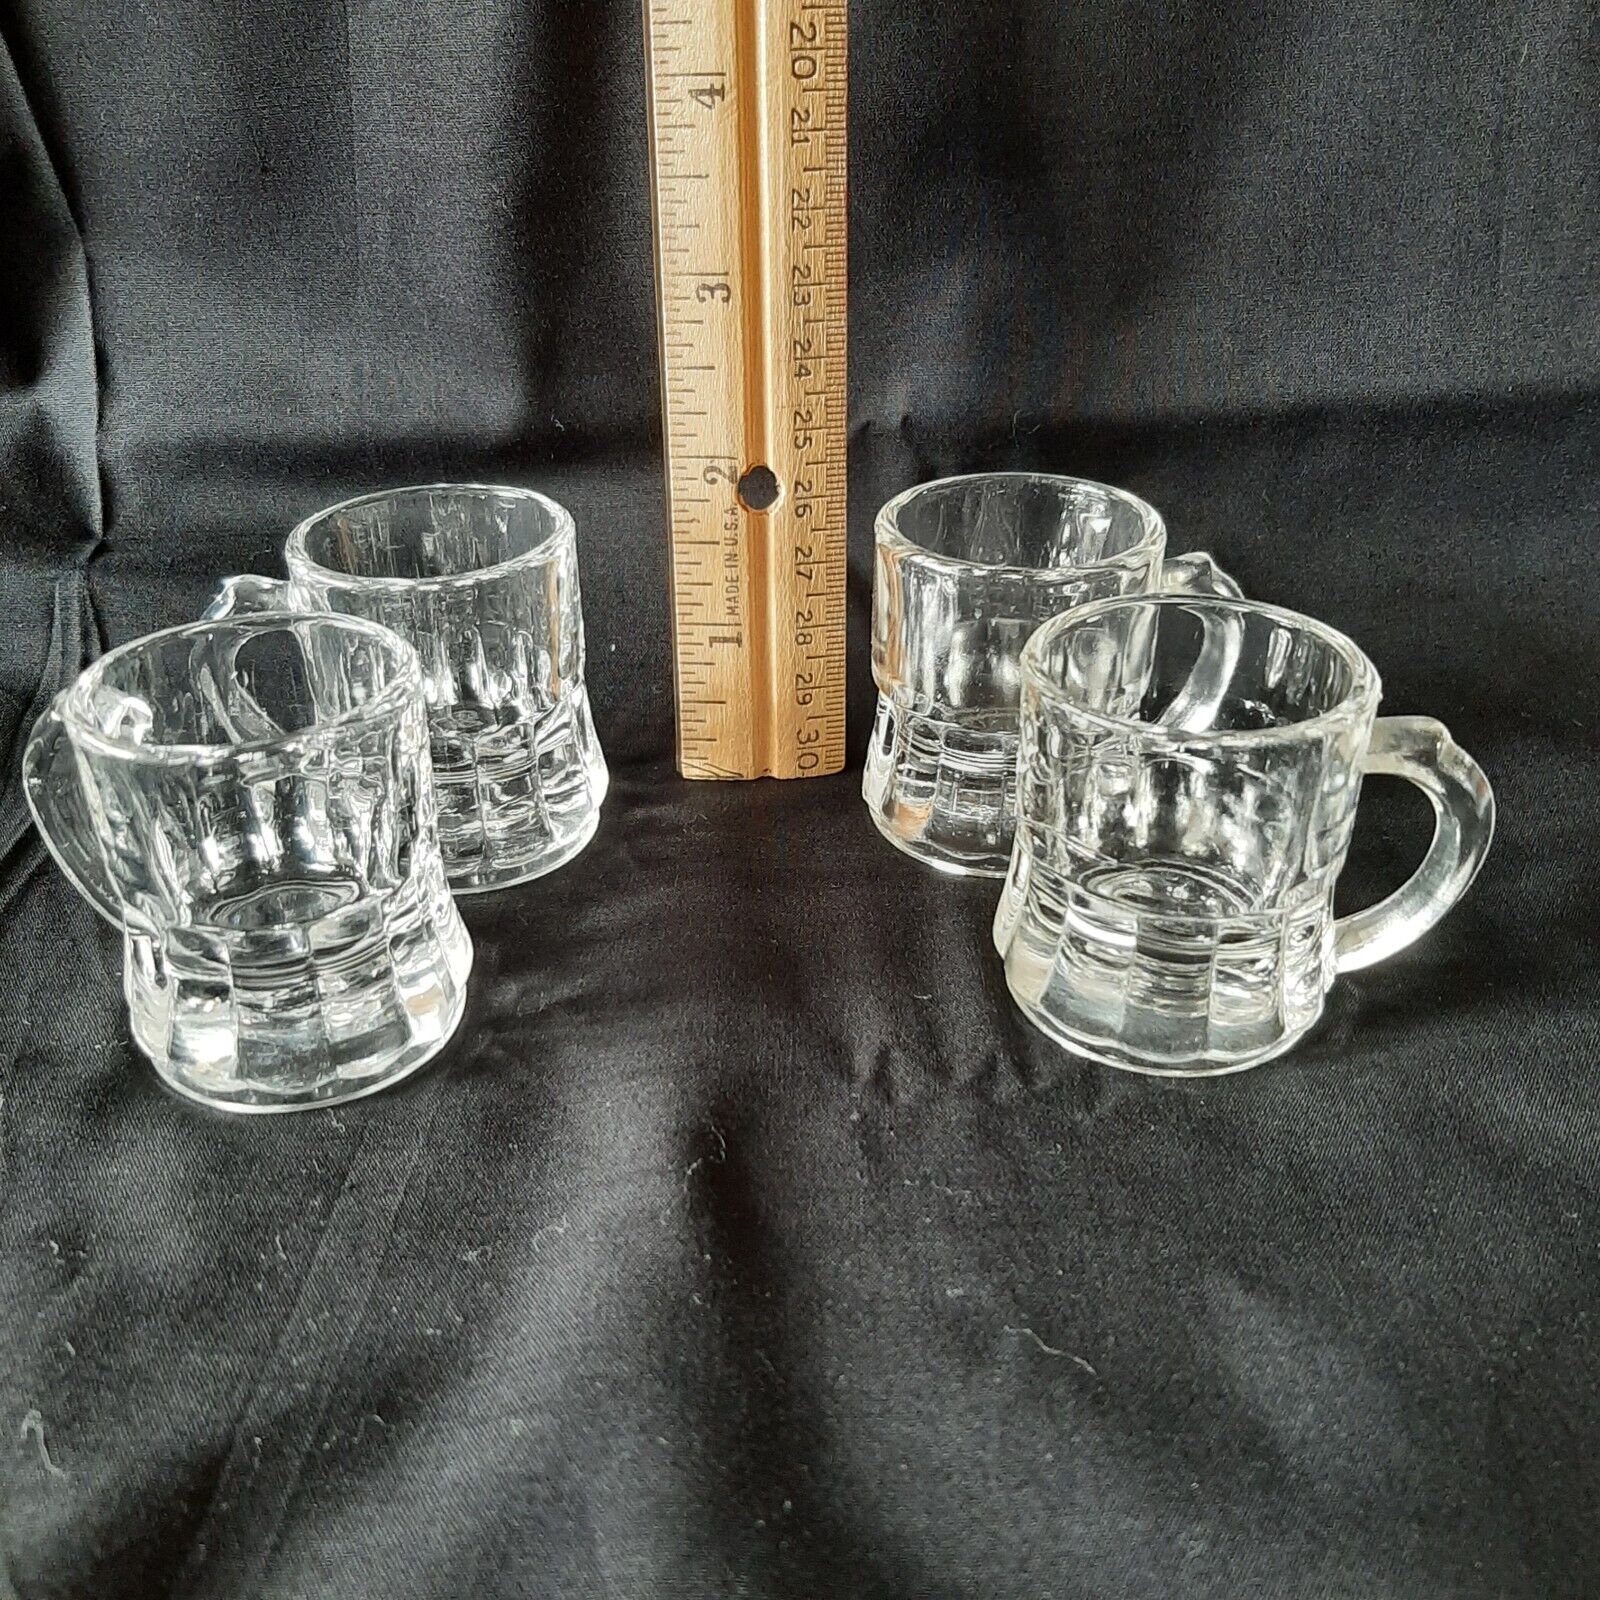 FOUR Miniature clear glass Beer mugs. Federal Glass Co.